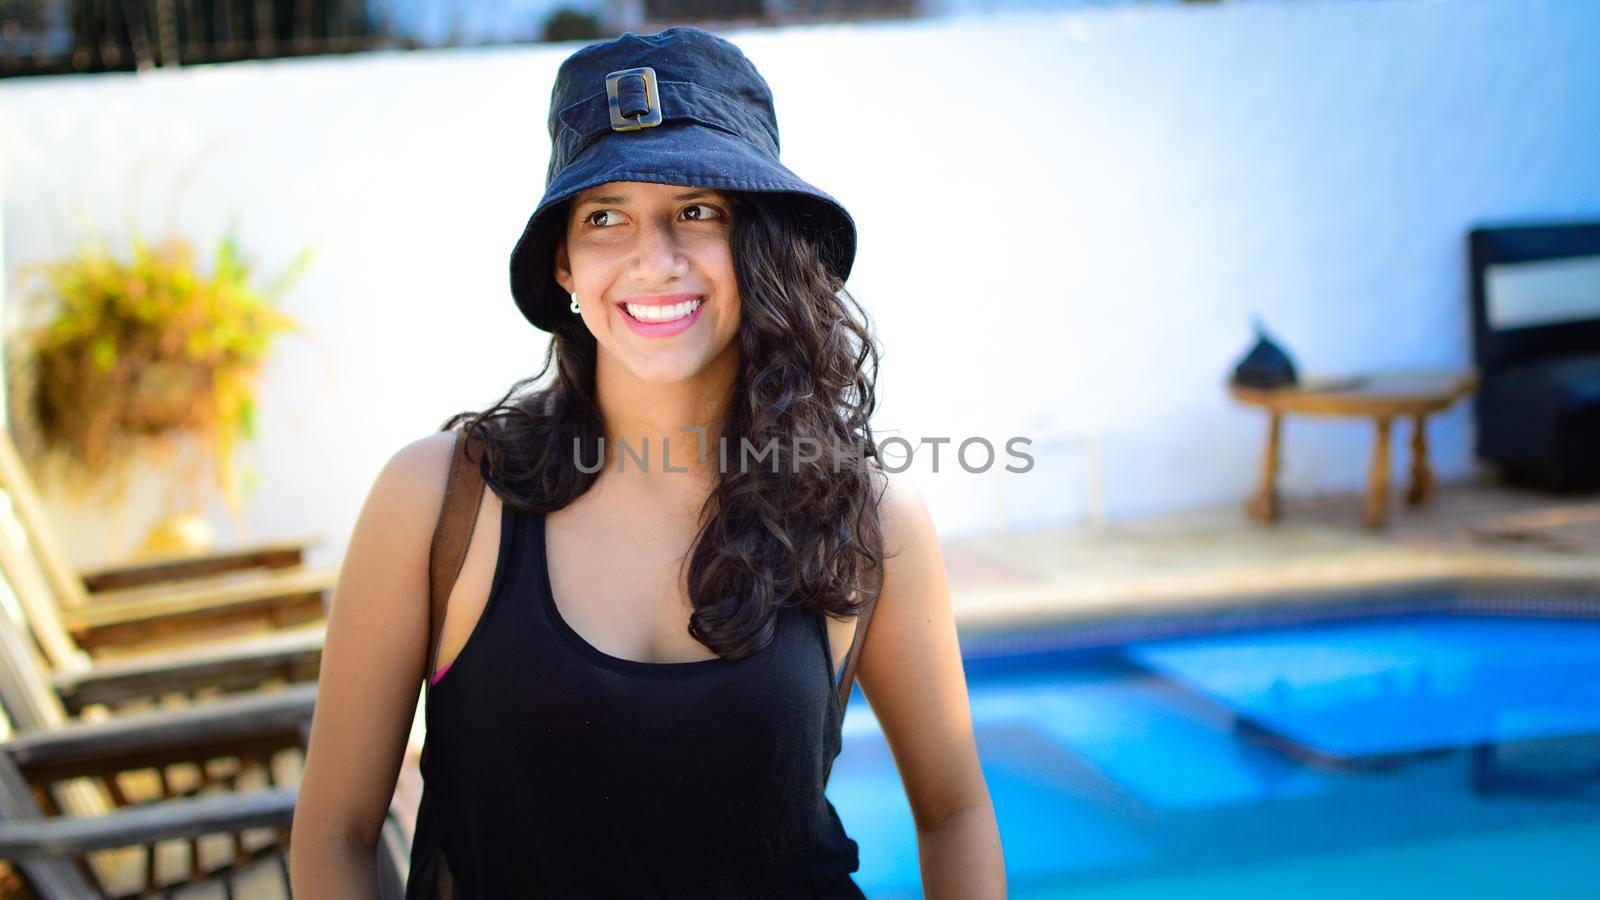 Pretty girl with hat smiling near a swimming pool, latin girl smiling by a swimming pool with muskoka chairs by isaiphoto